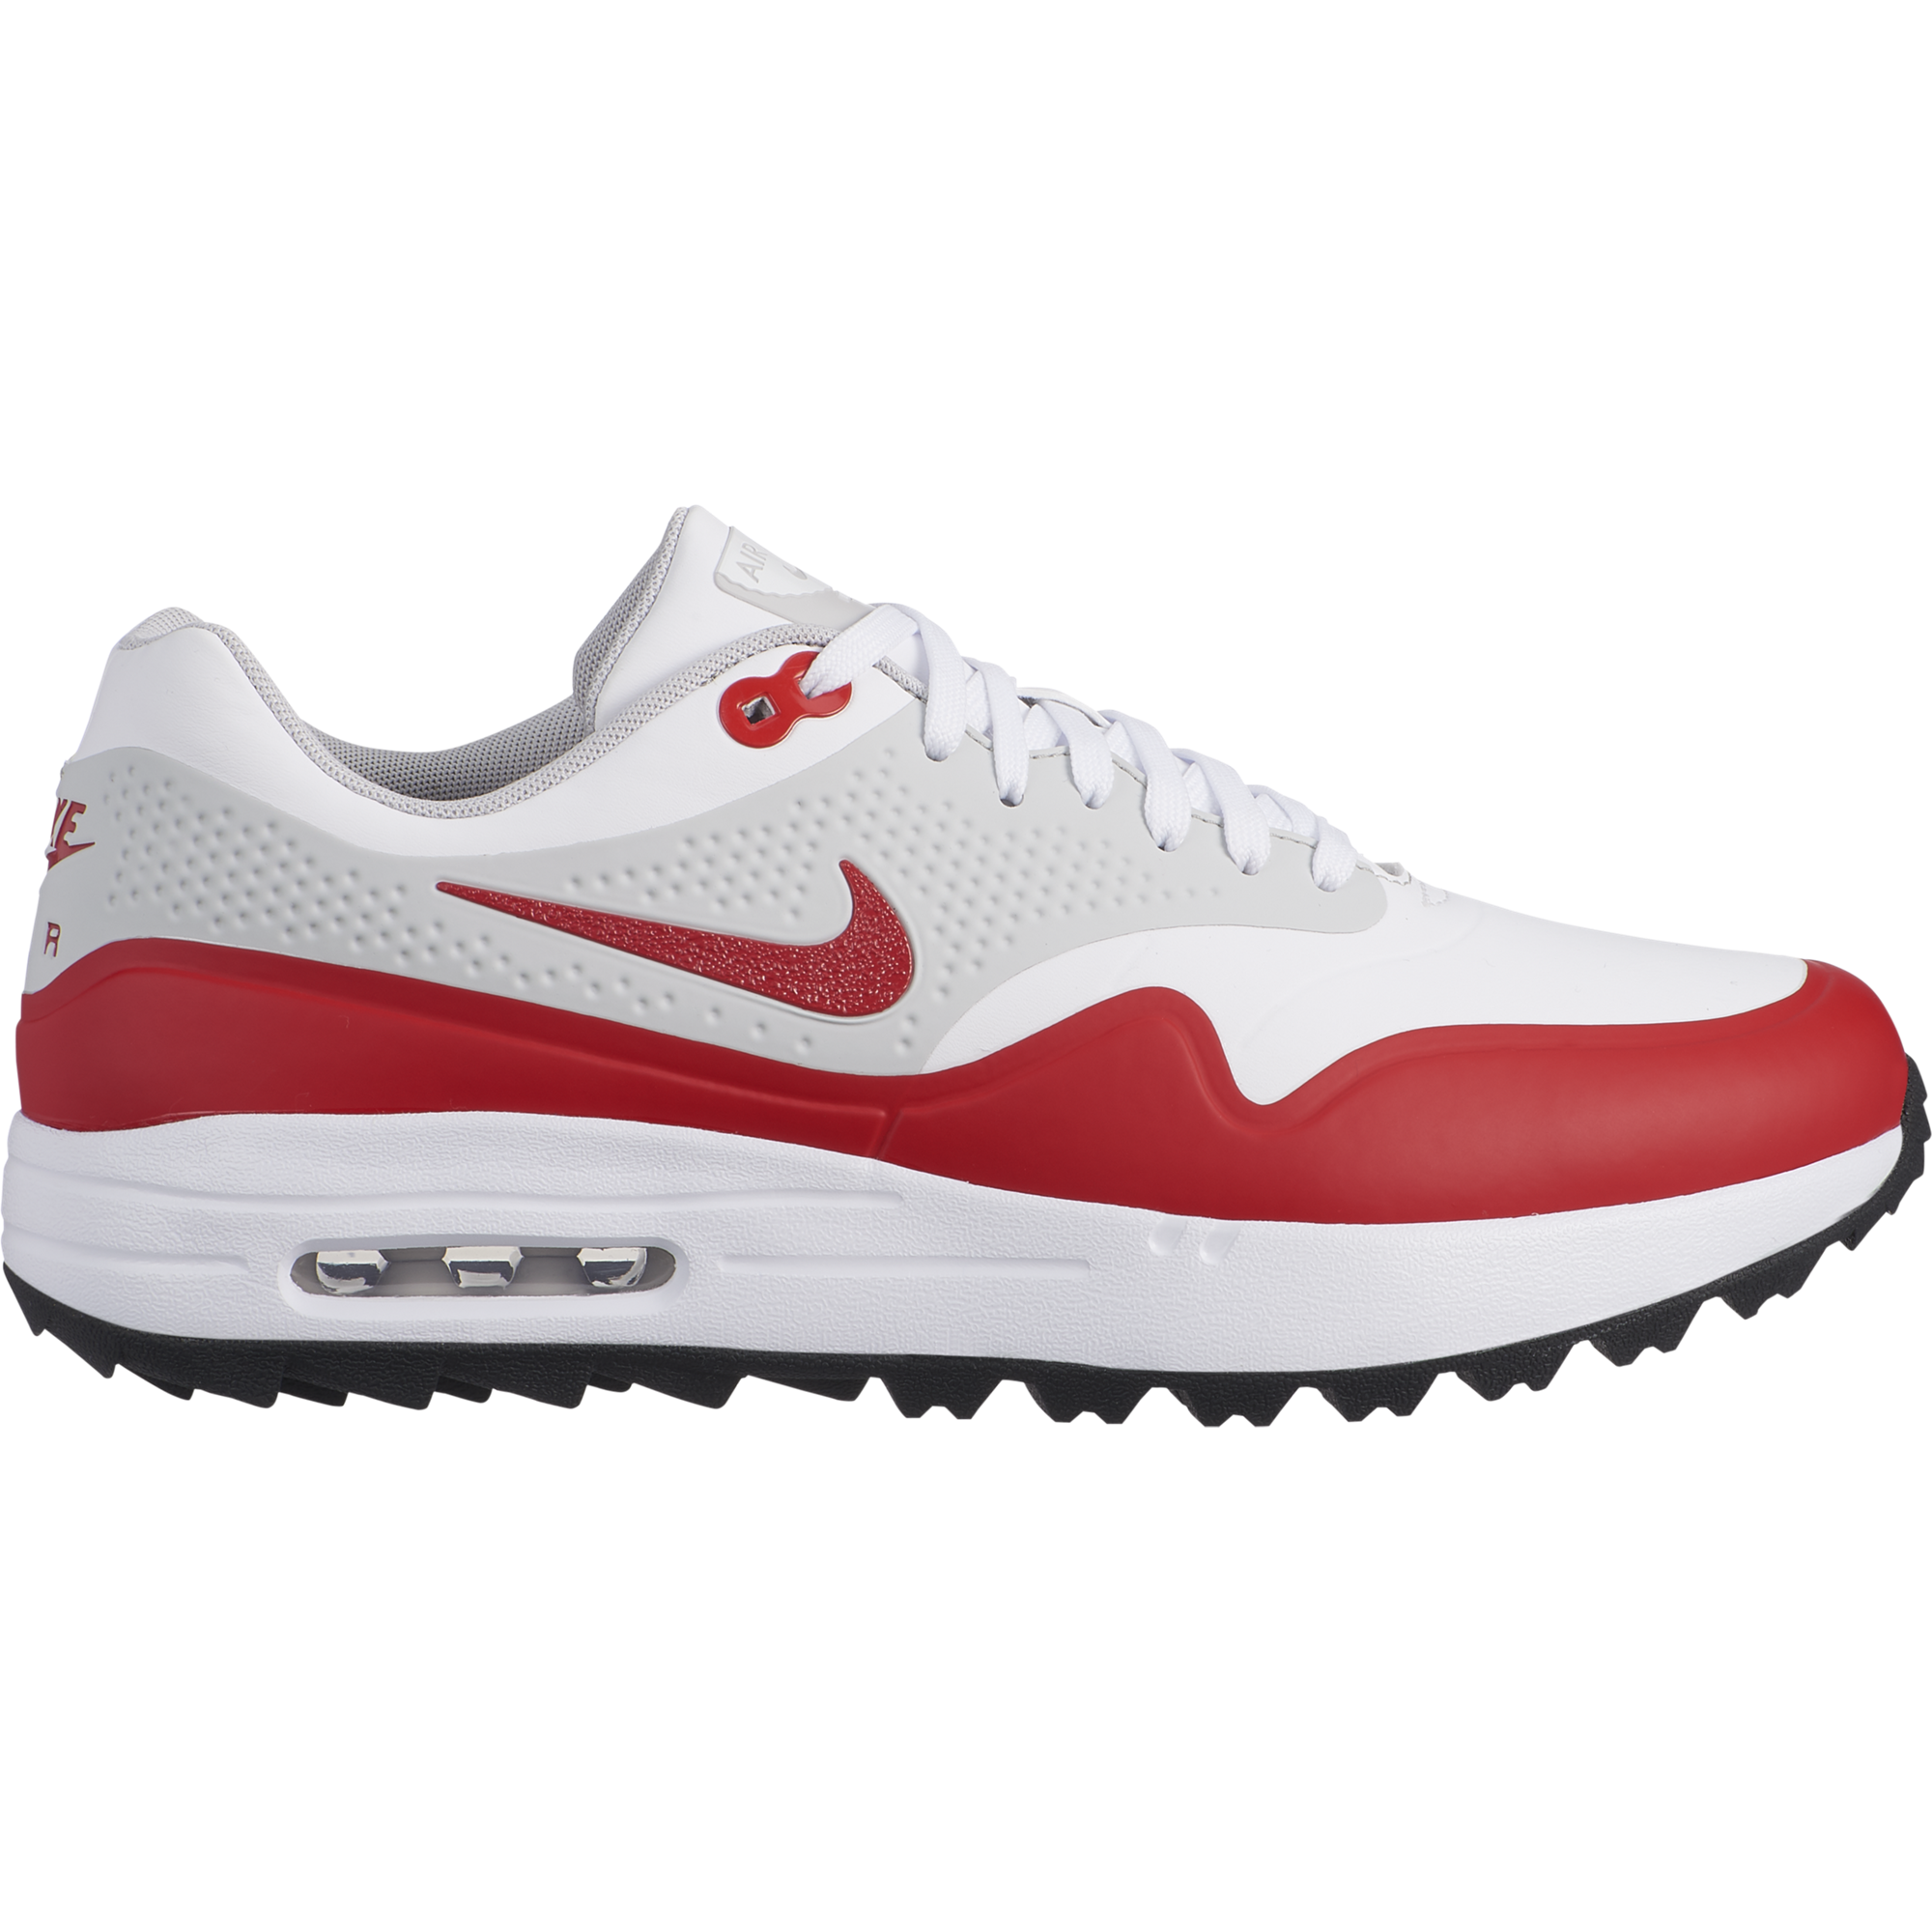 nike air max 1 red and white